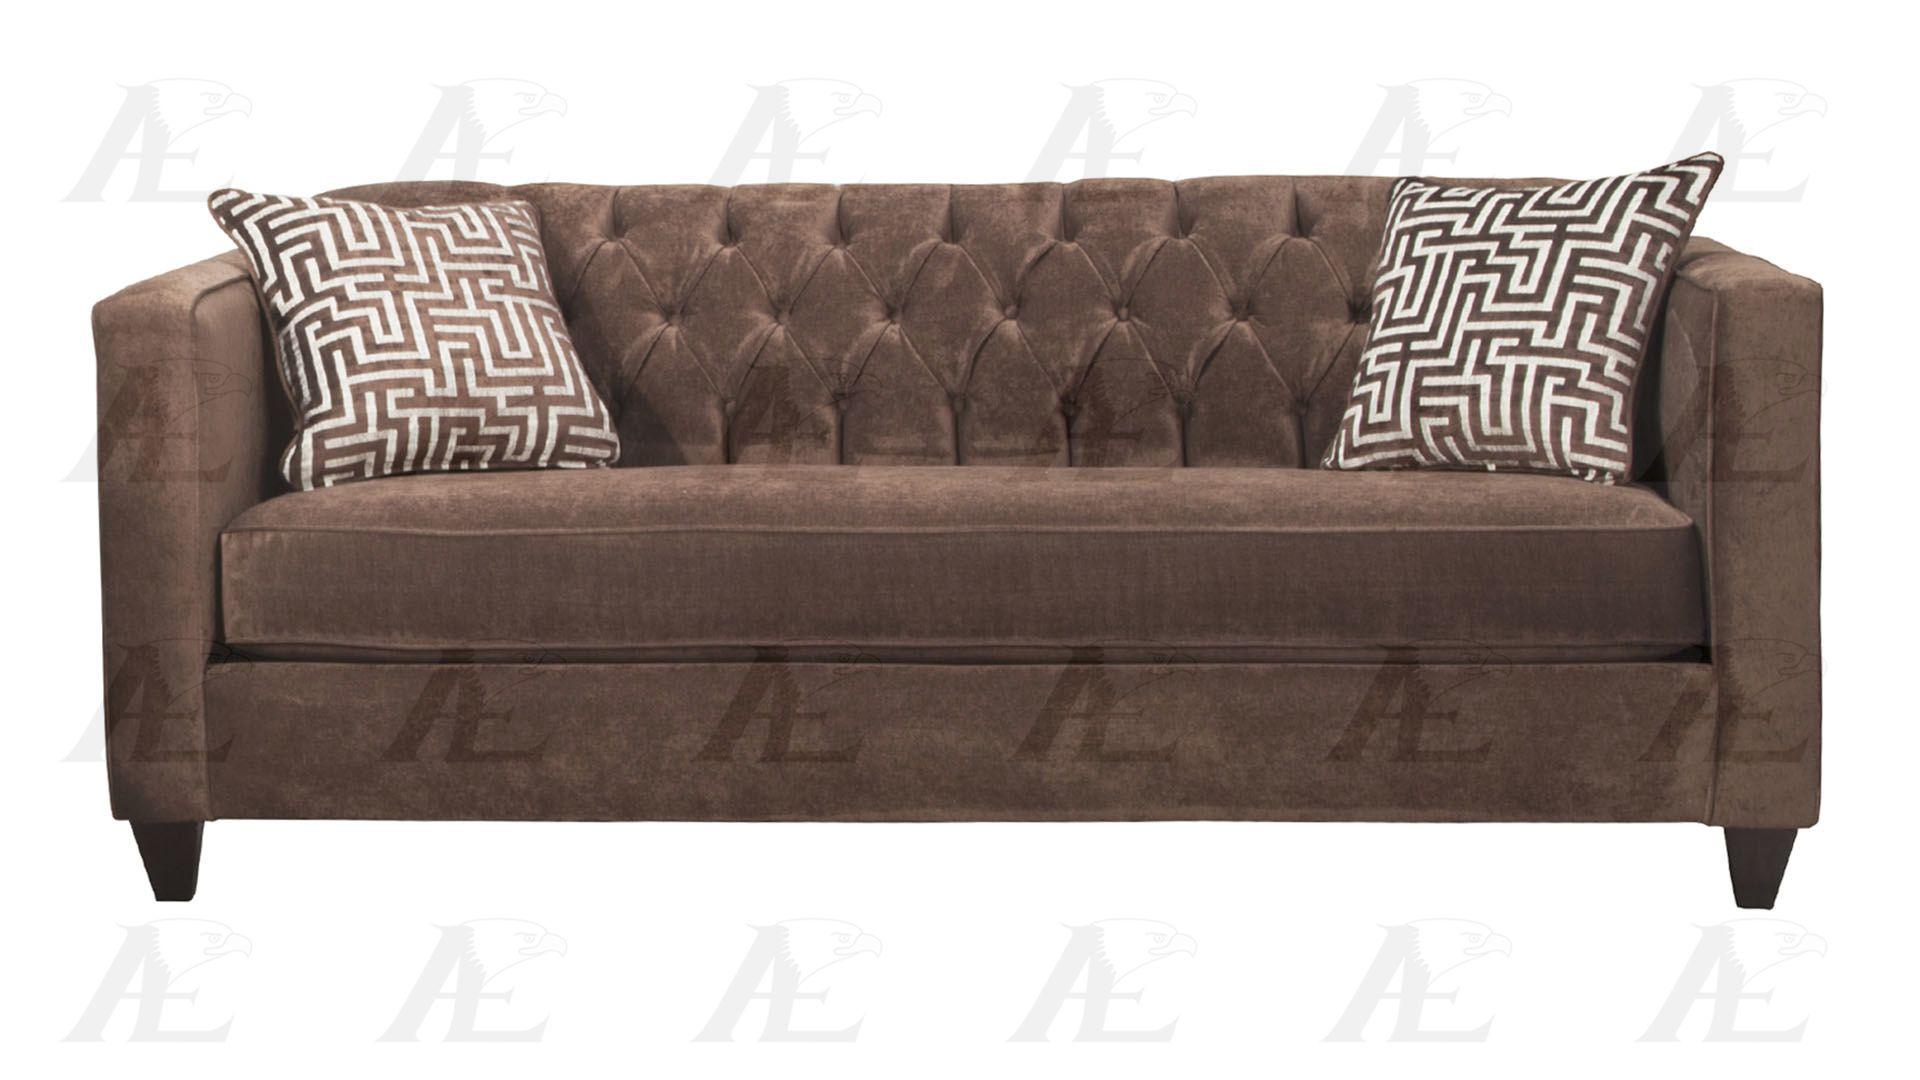 

    
American Eagle Furniture AE2602-BR Brown Tufted Sofa and Loveseat Set Fabric Contemporary 2Pcs
